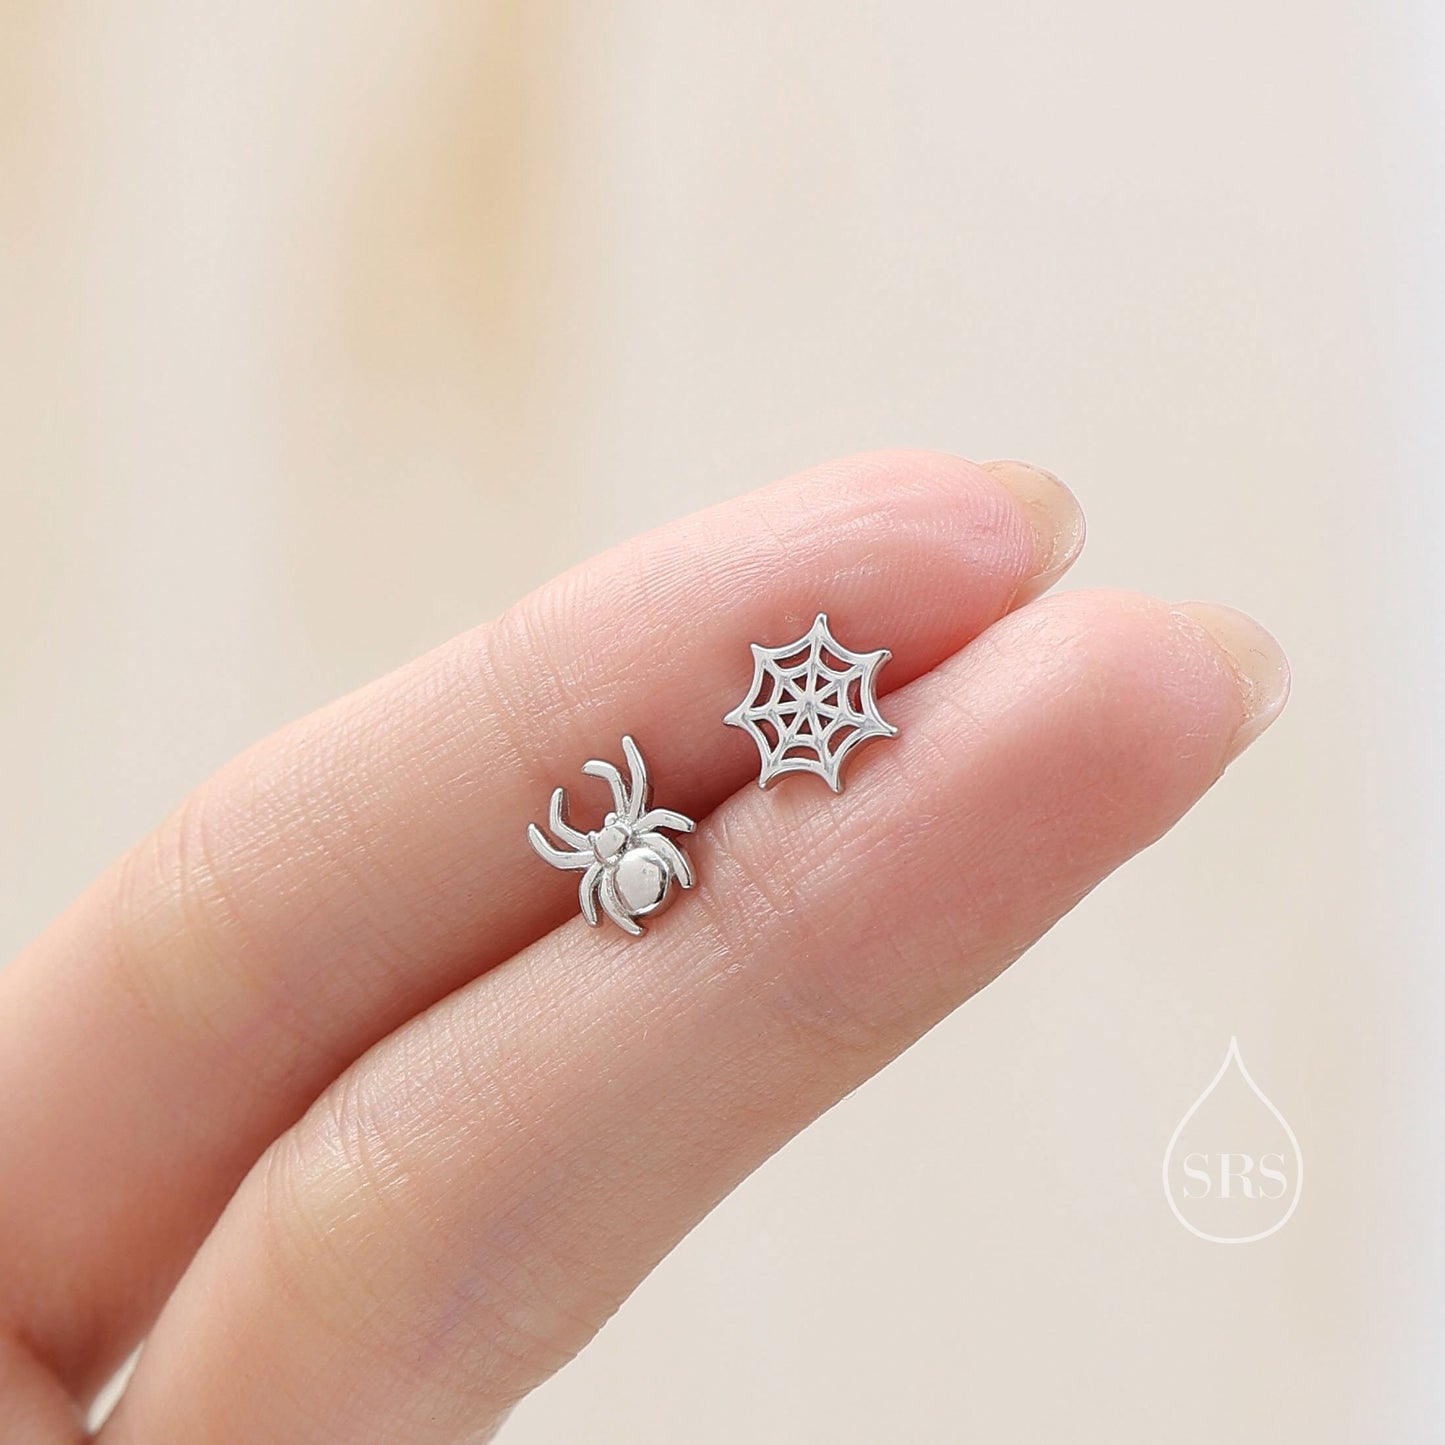 Mismatched Spider and Spider Web Stud Earrings in Sterling Silver, Silver or Gold,  Nature Inspired, Insect Earrings